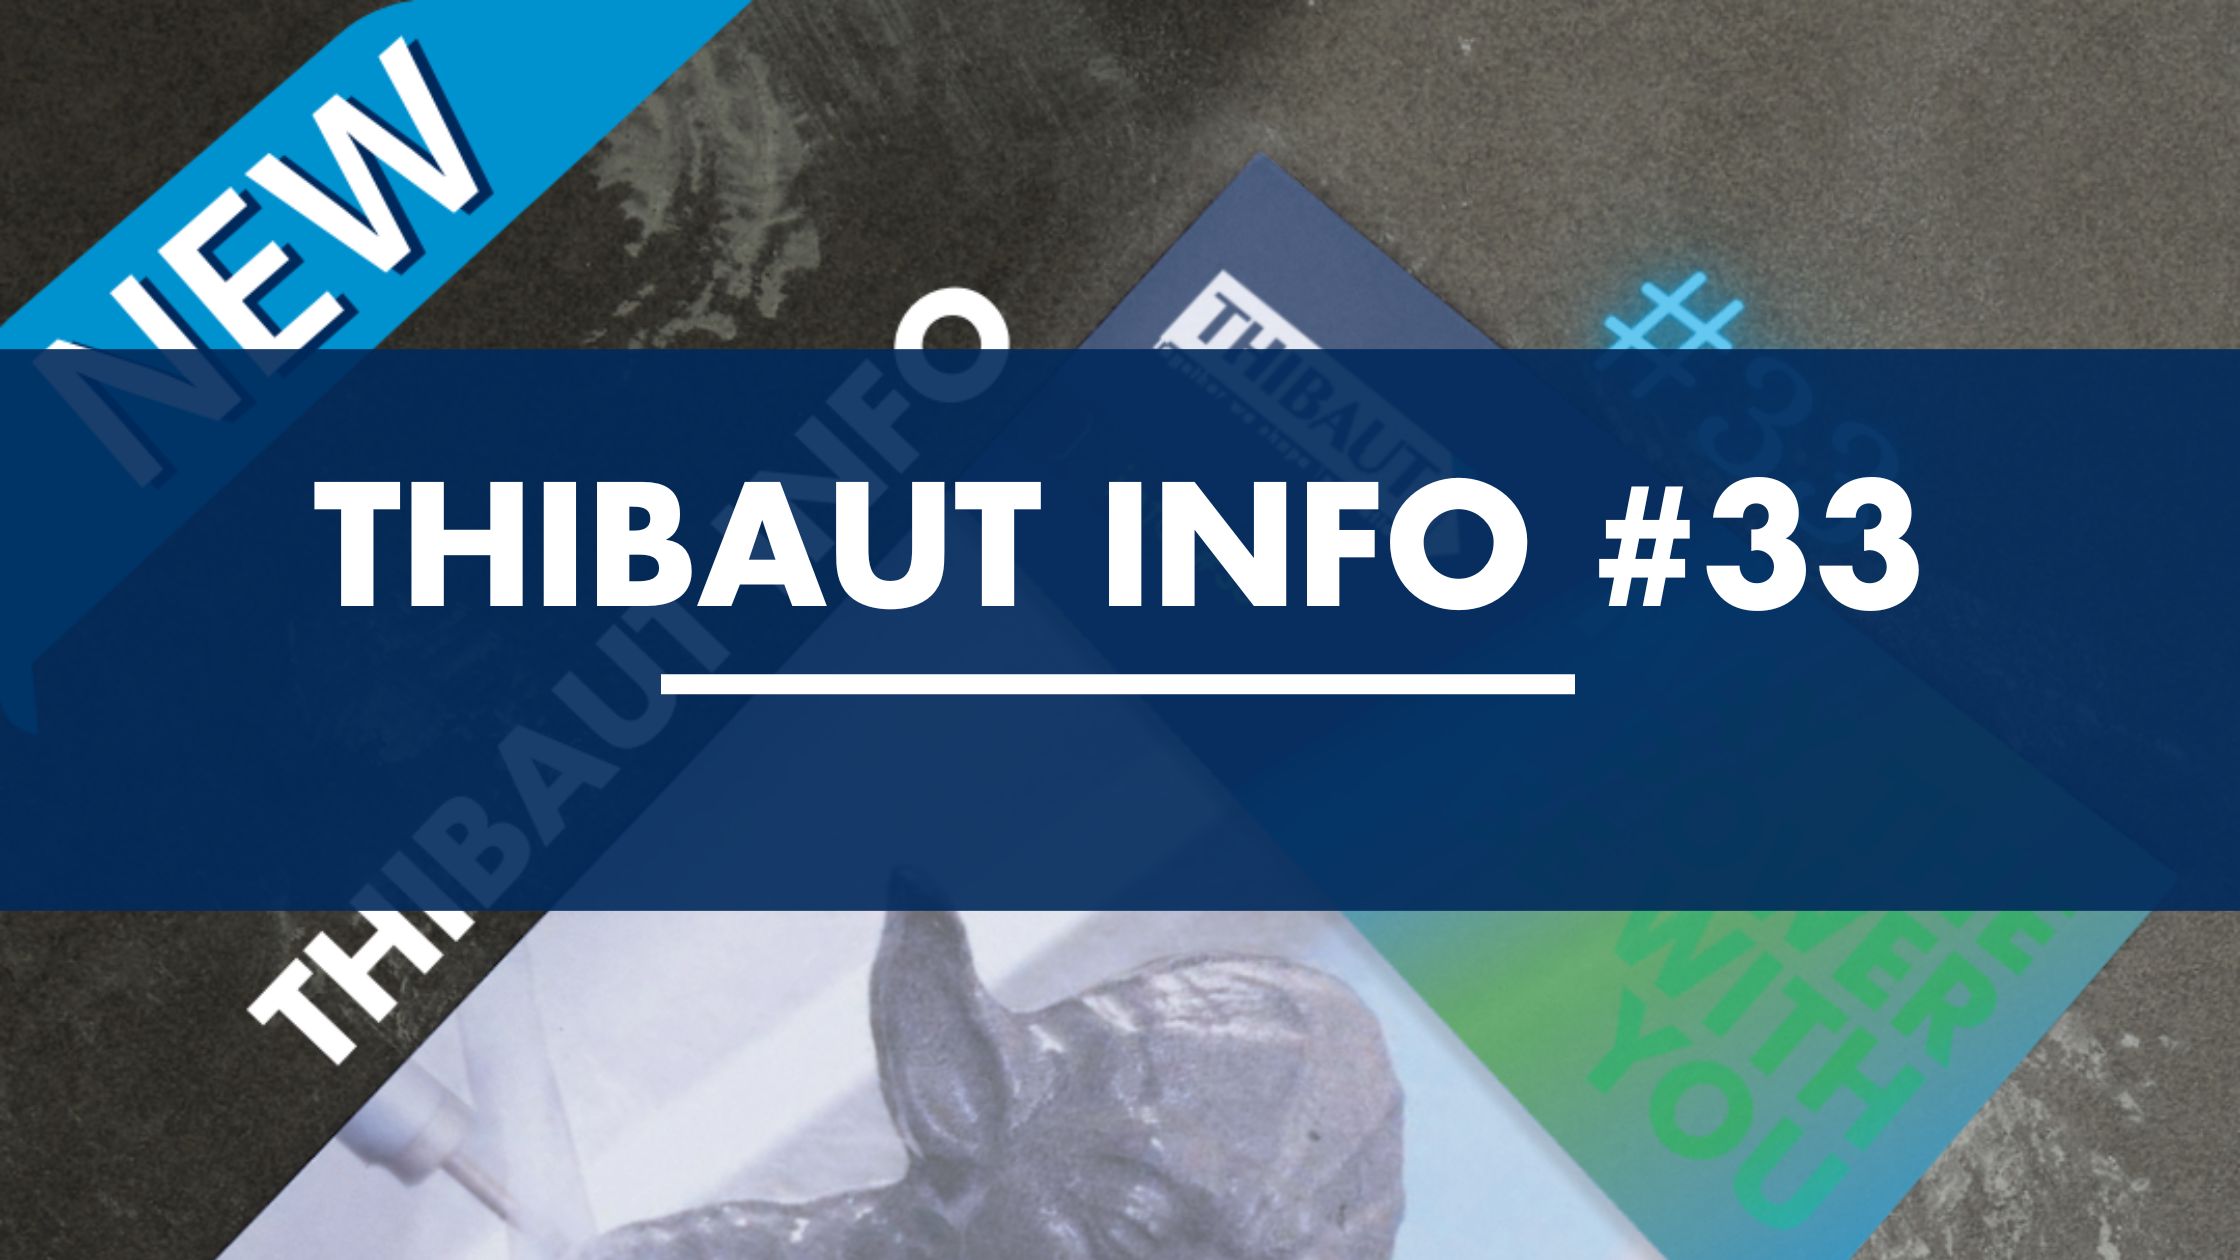 Discover the Thibaut Info #33 brochure: The Evolution of Excellence